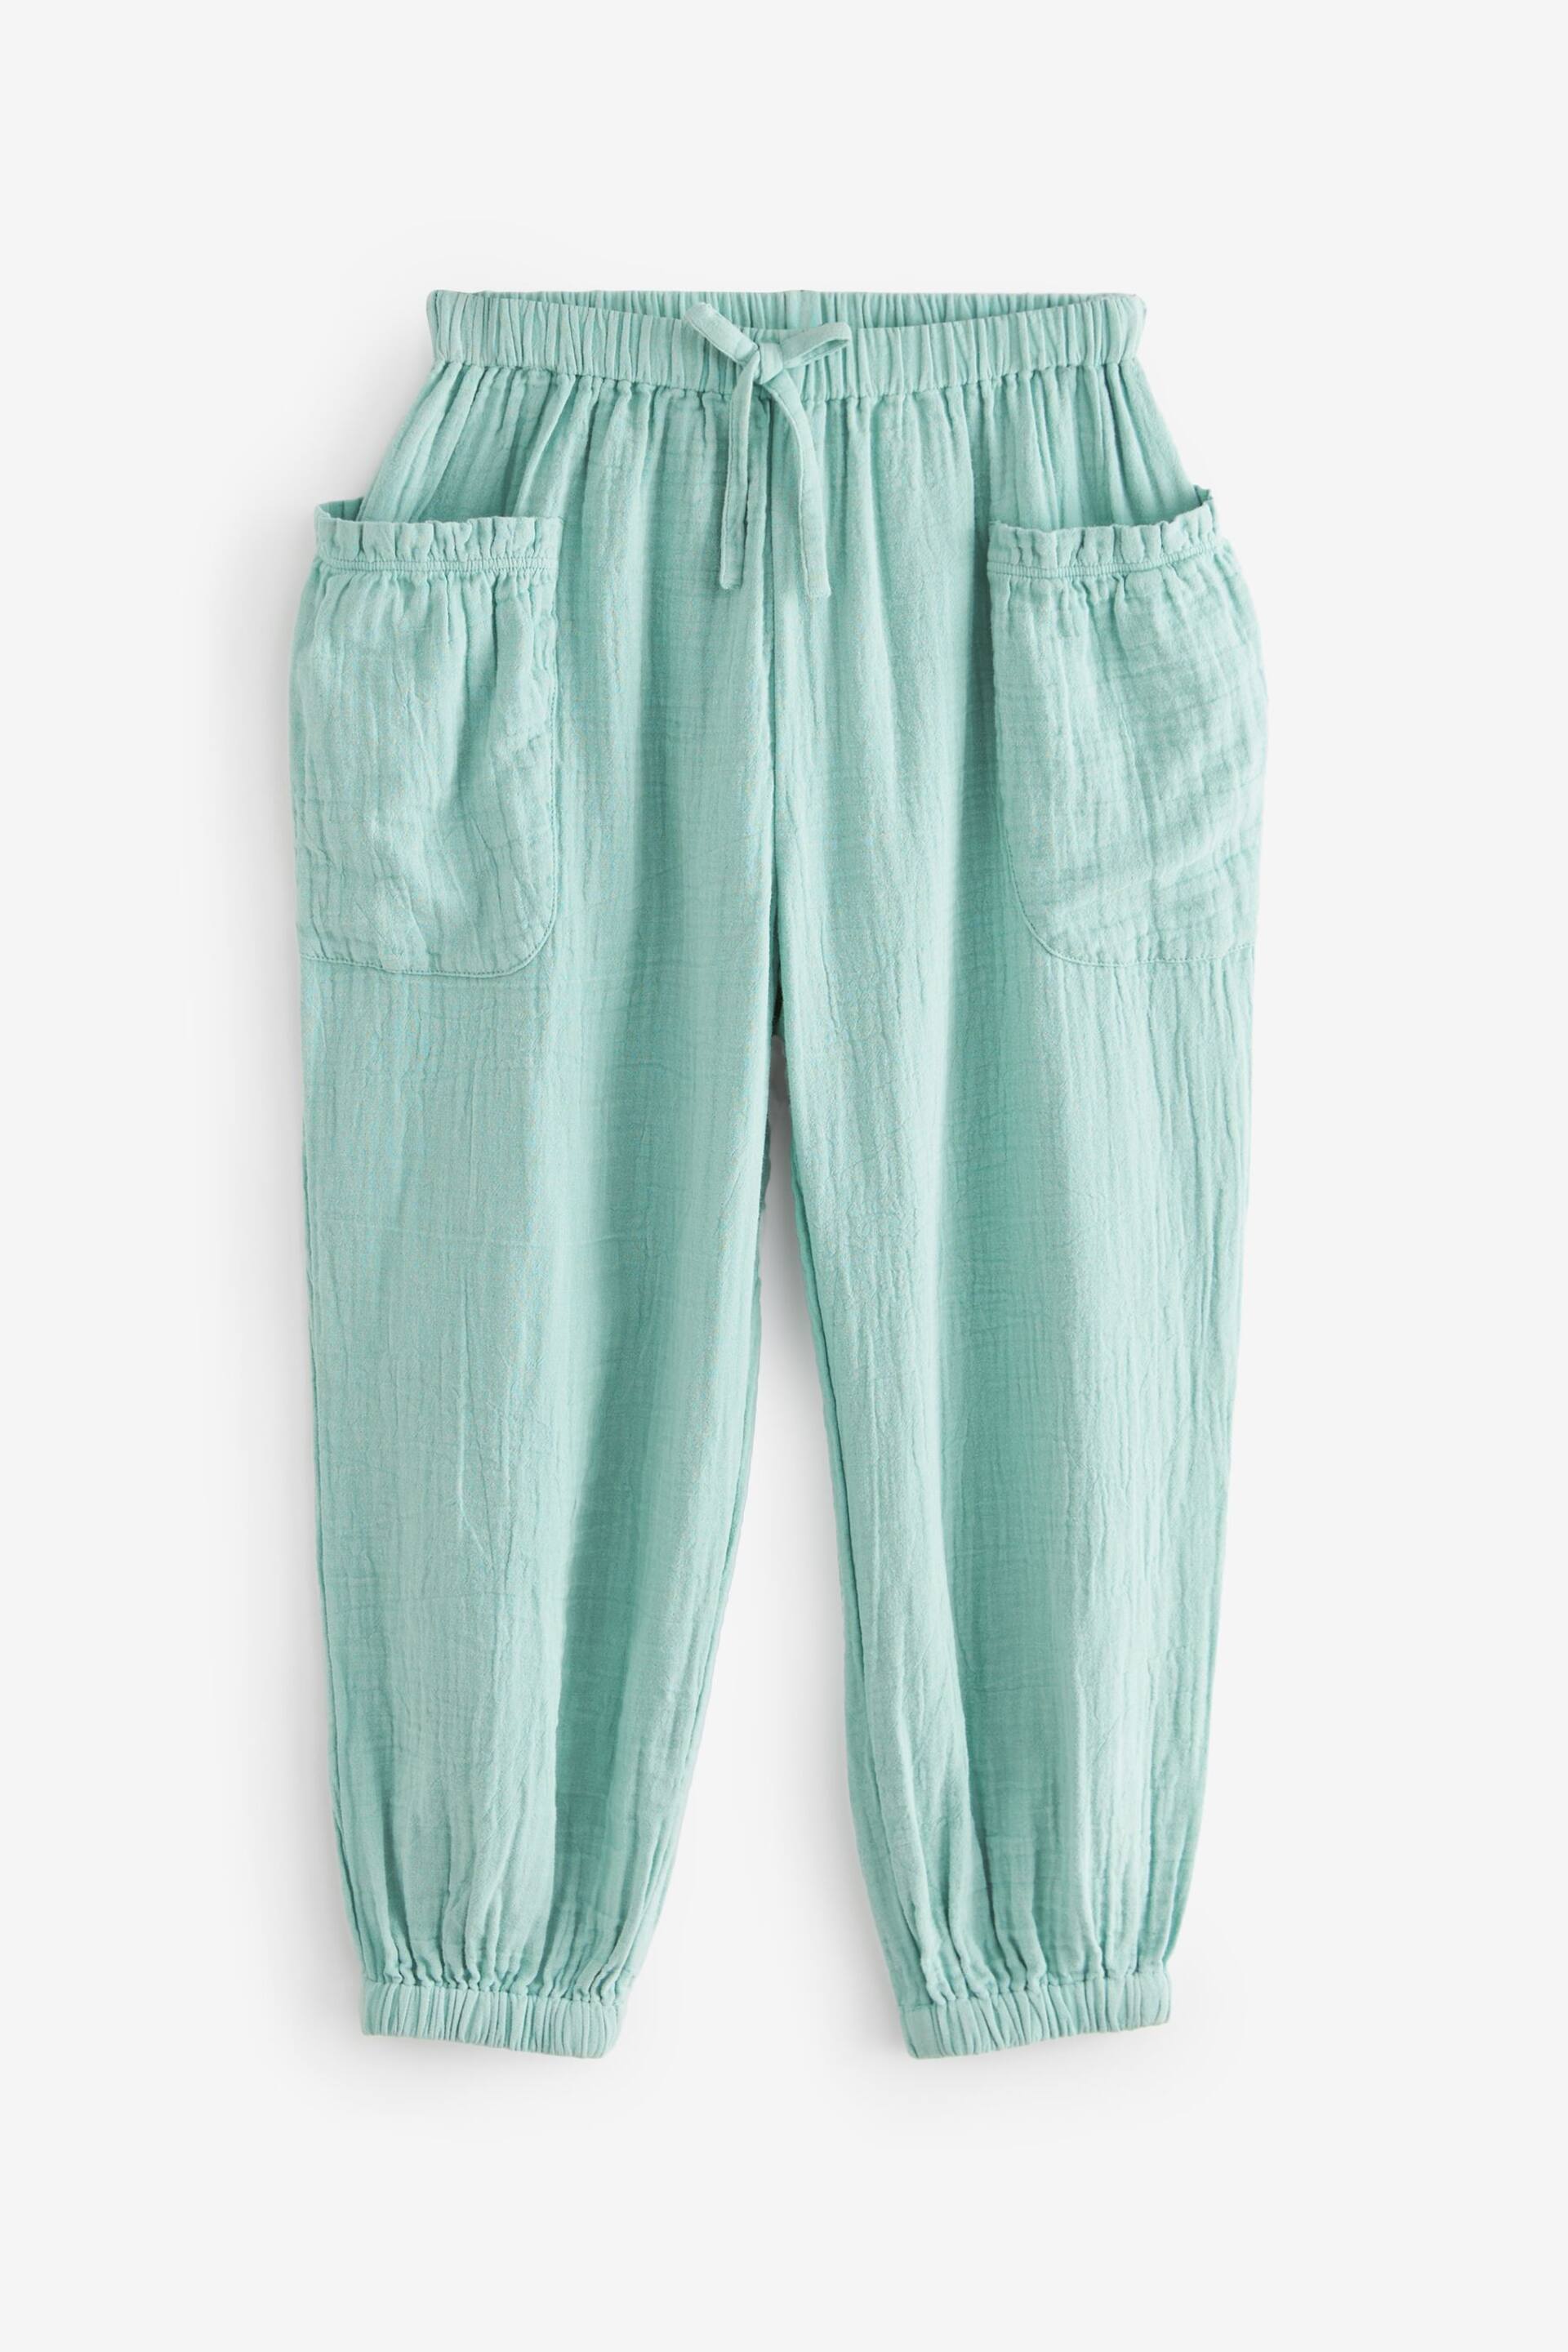 Teal Blue Textured Pull-On Trousers (3-16yrs) - Image 5 of 7